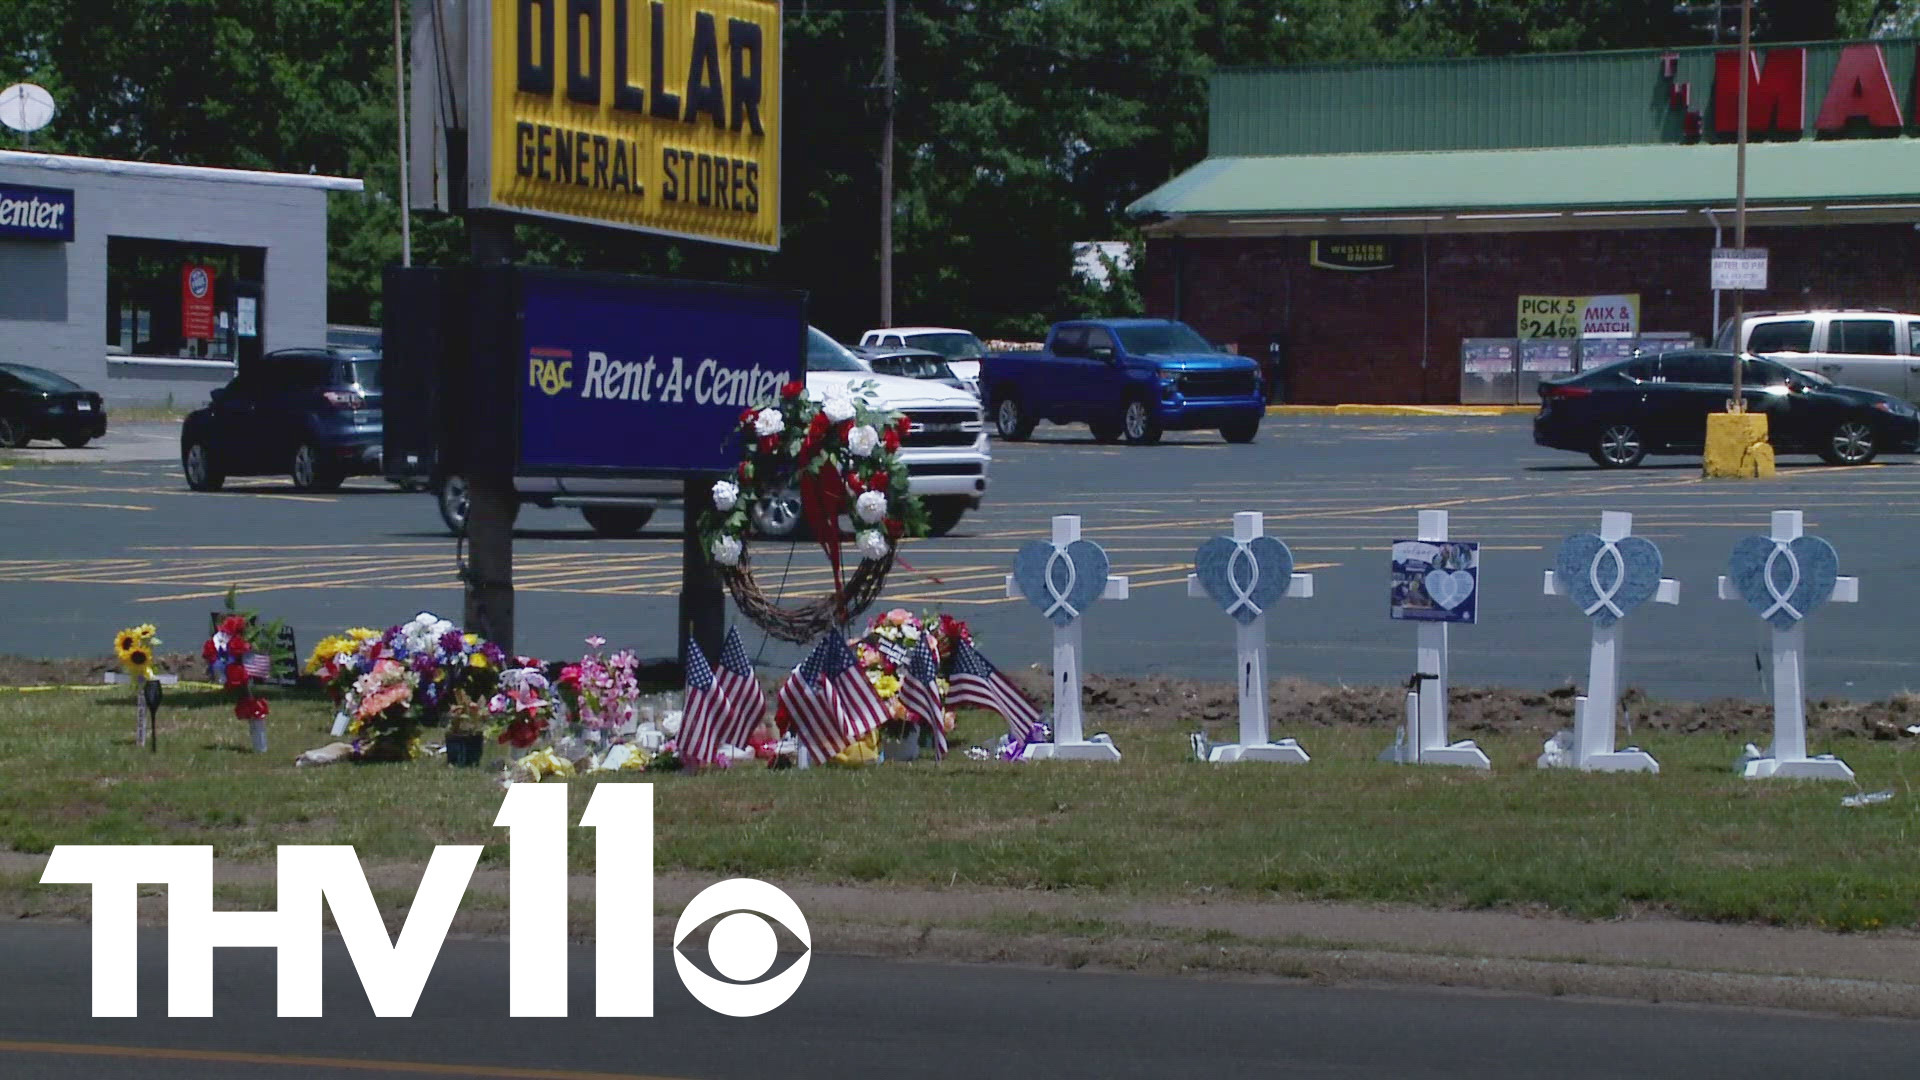 One week after a tragic mass shooting in Fordyce, Gov. Sanders said that she'll travel to meet with people in the community as they heal from last week's incident.